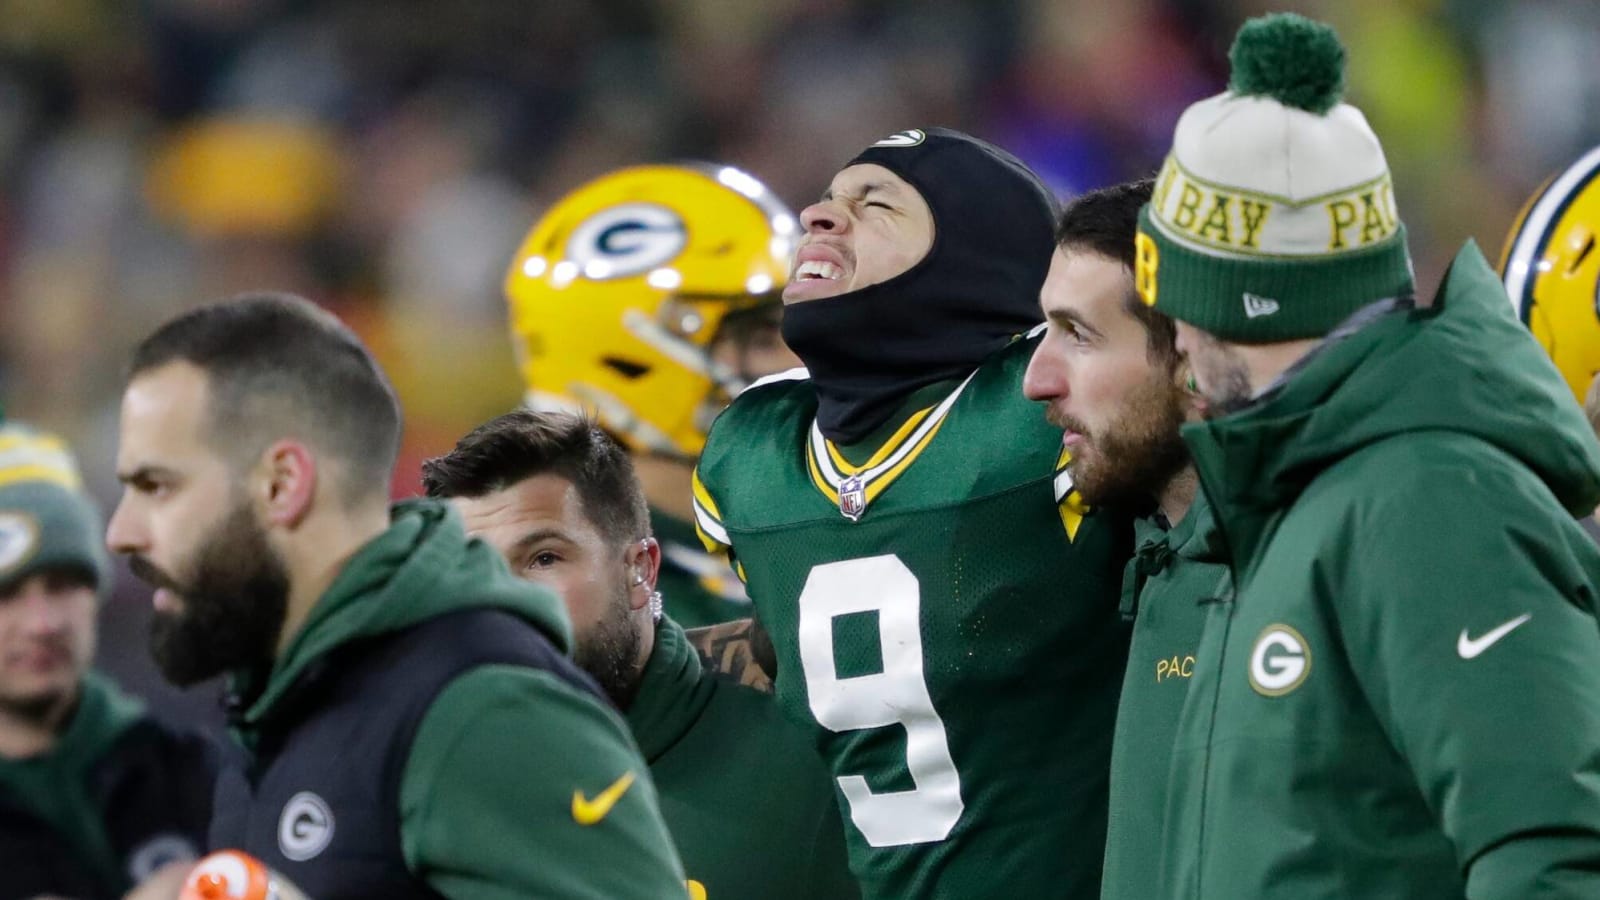 Packers get troubling injury news ahead of Super Wild Card Weekend matchup